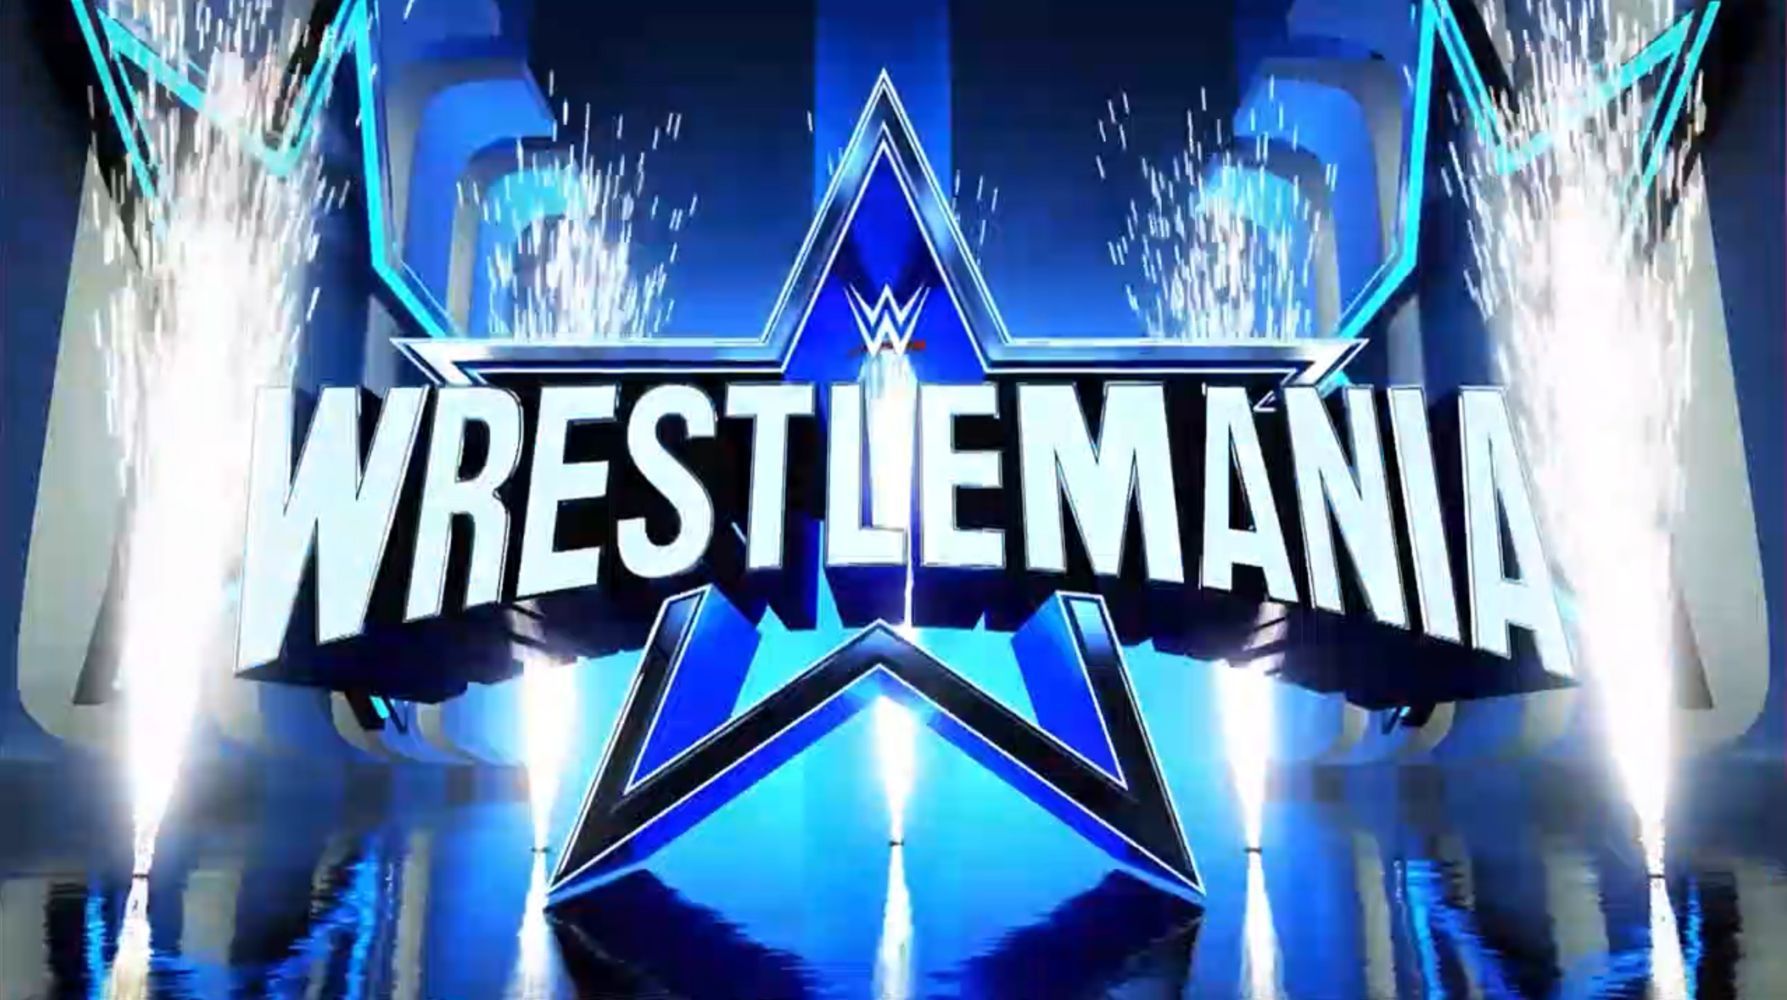 WWE is once again looking for mainstream publicity for WrestleMania 38.